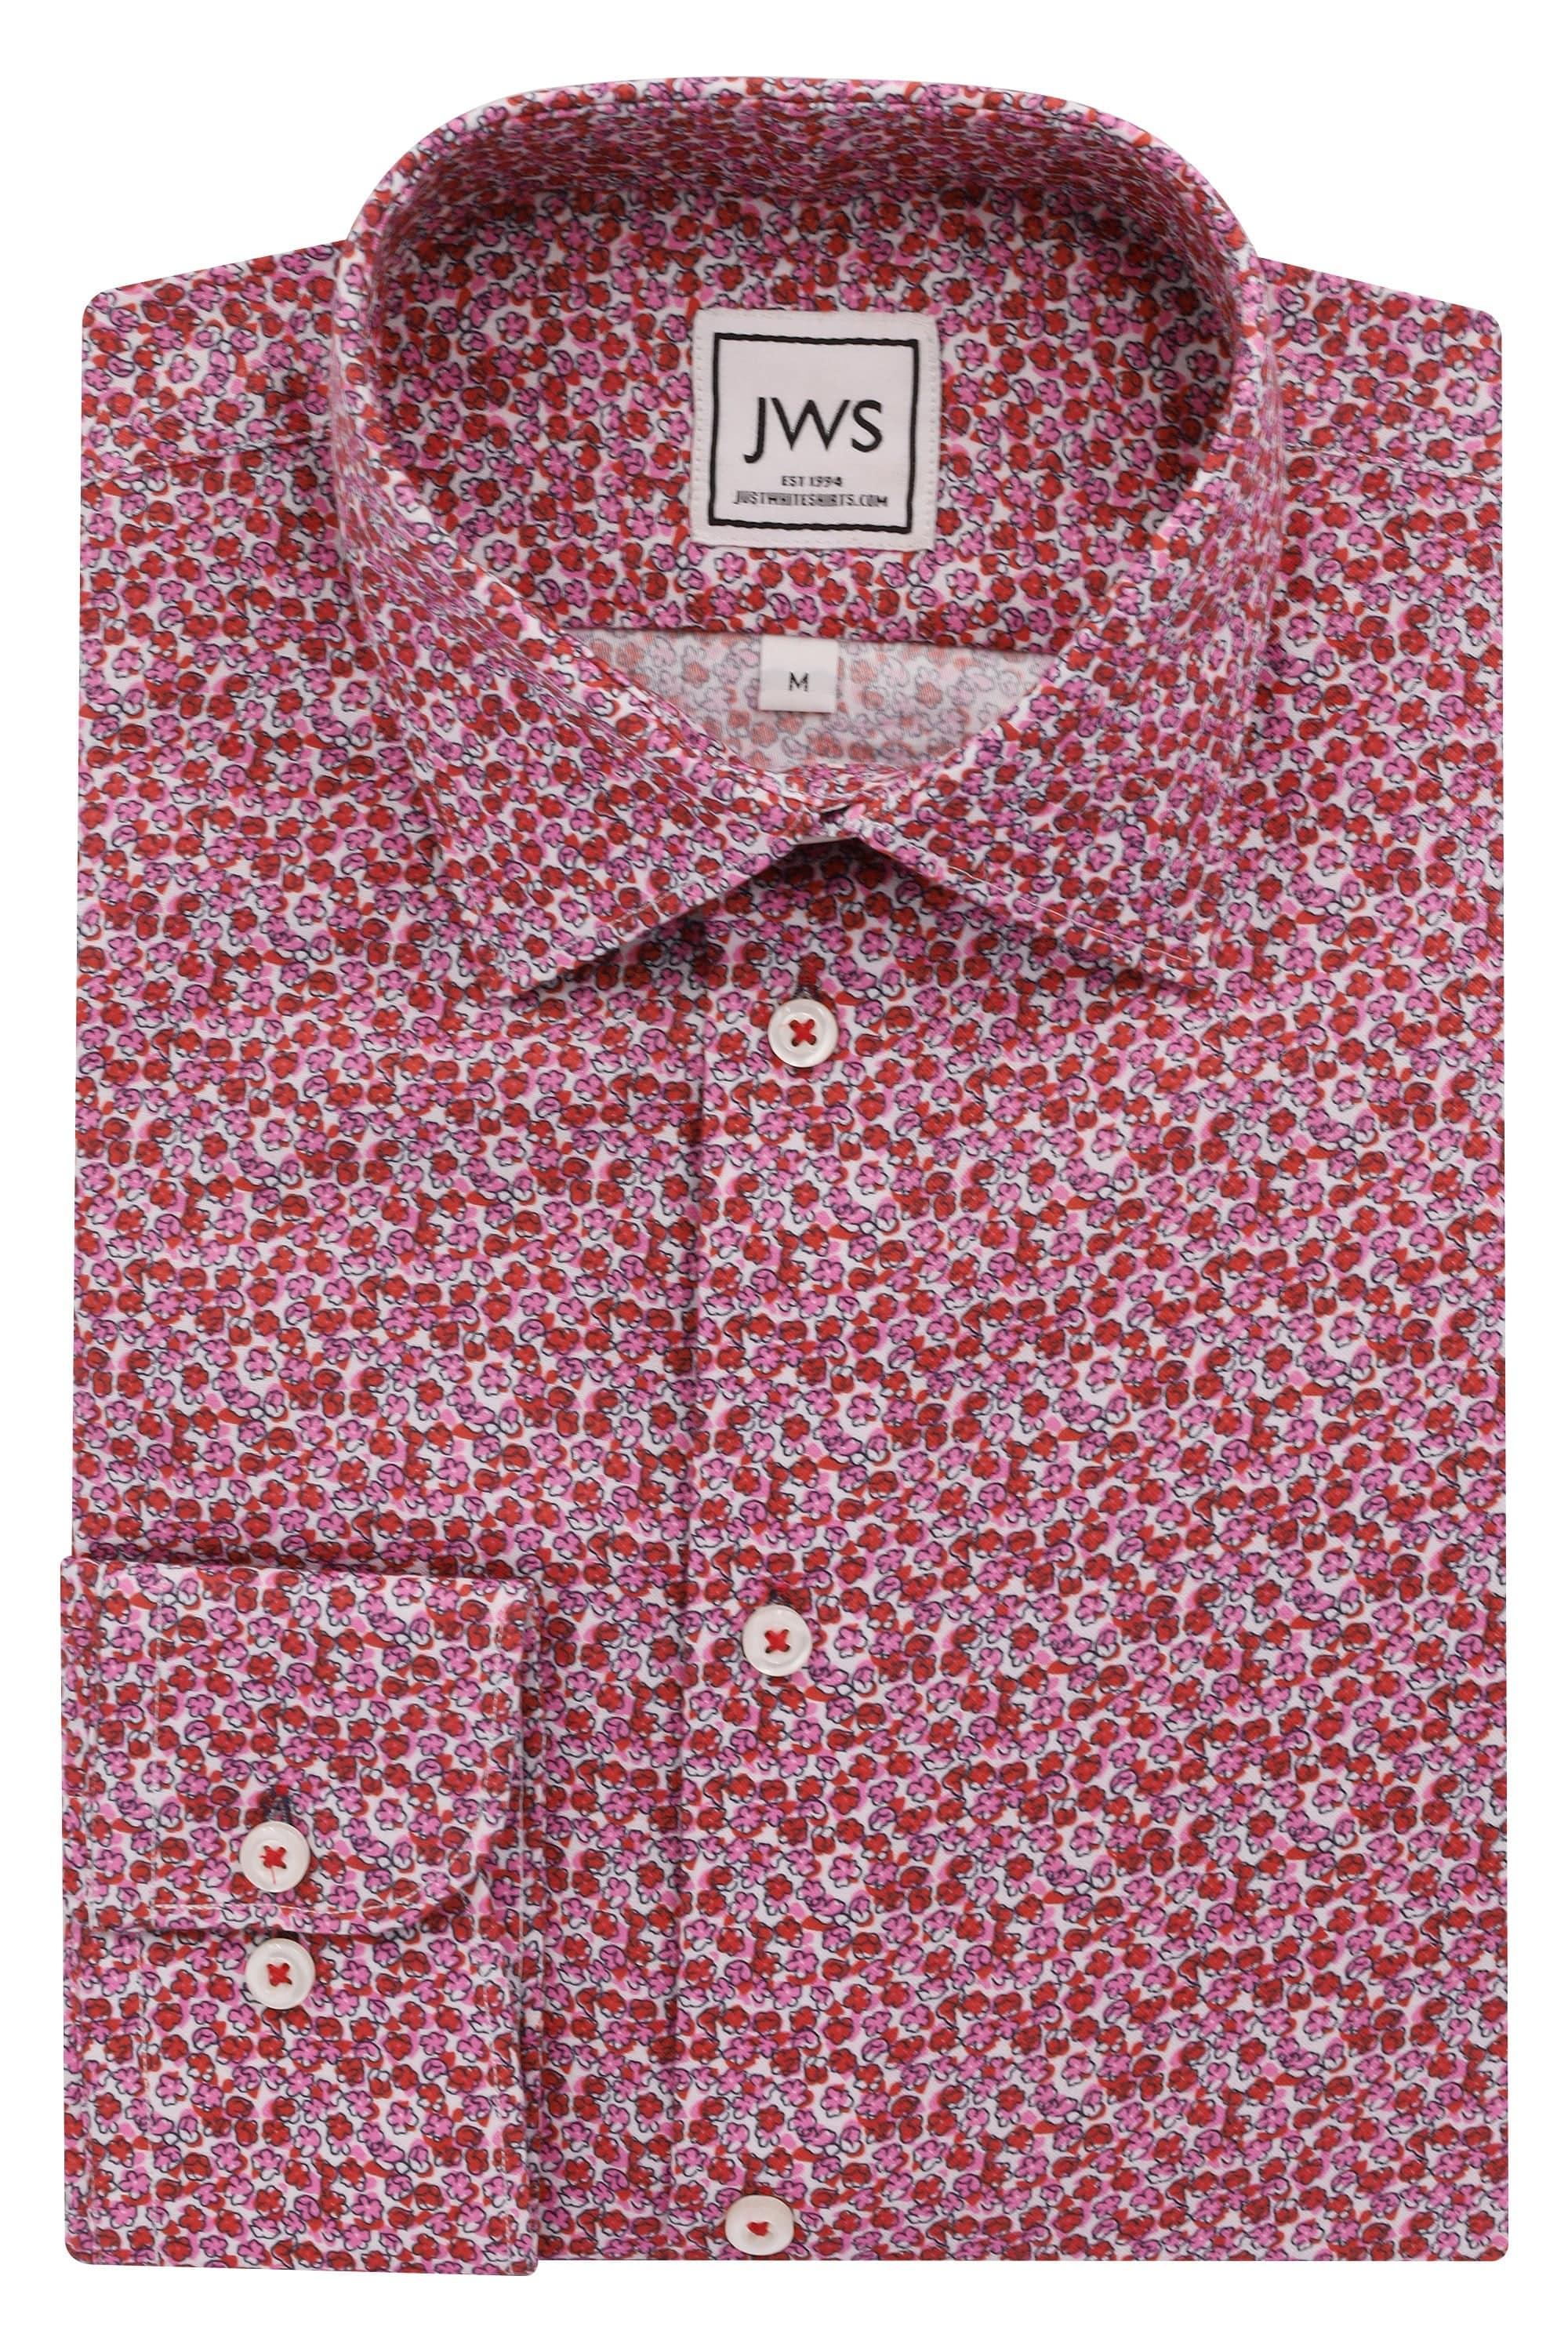 RED PINK FLOWERS - Just White Shirts